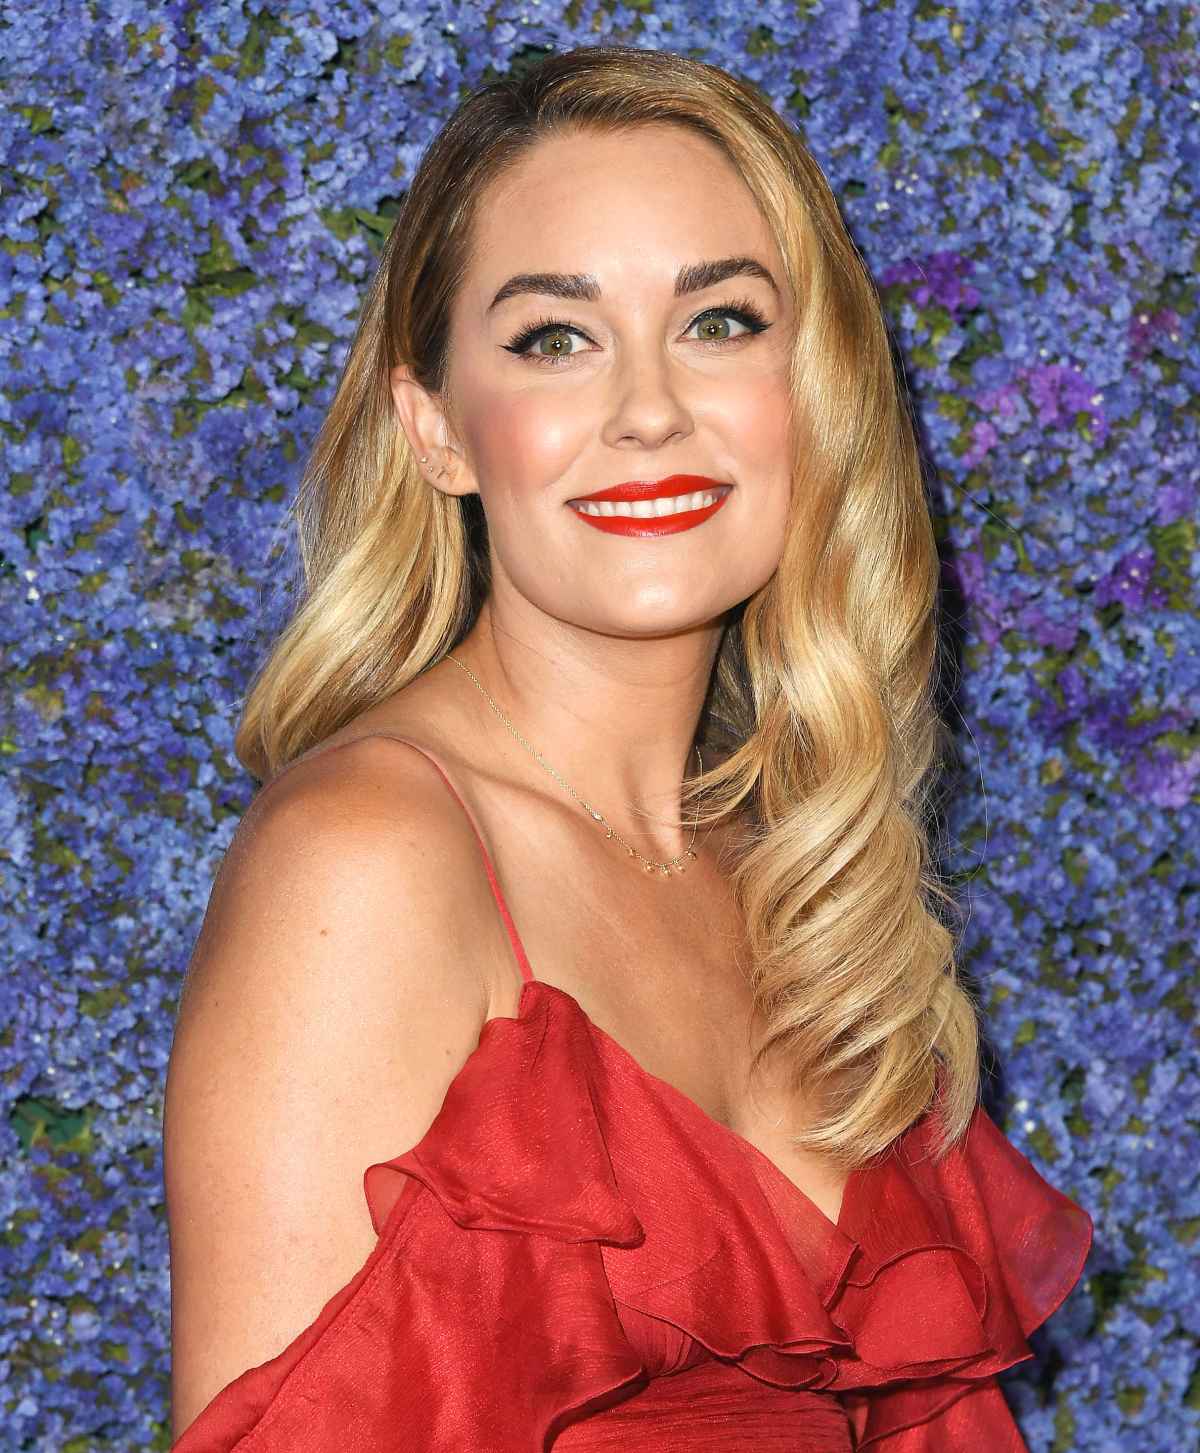 Lauren Conrad Has Used This Kitchen Essential Every Day for 8 Years